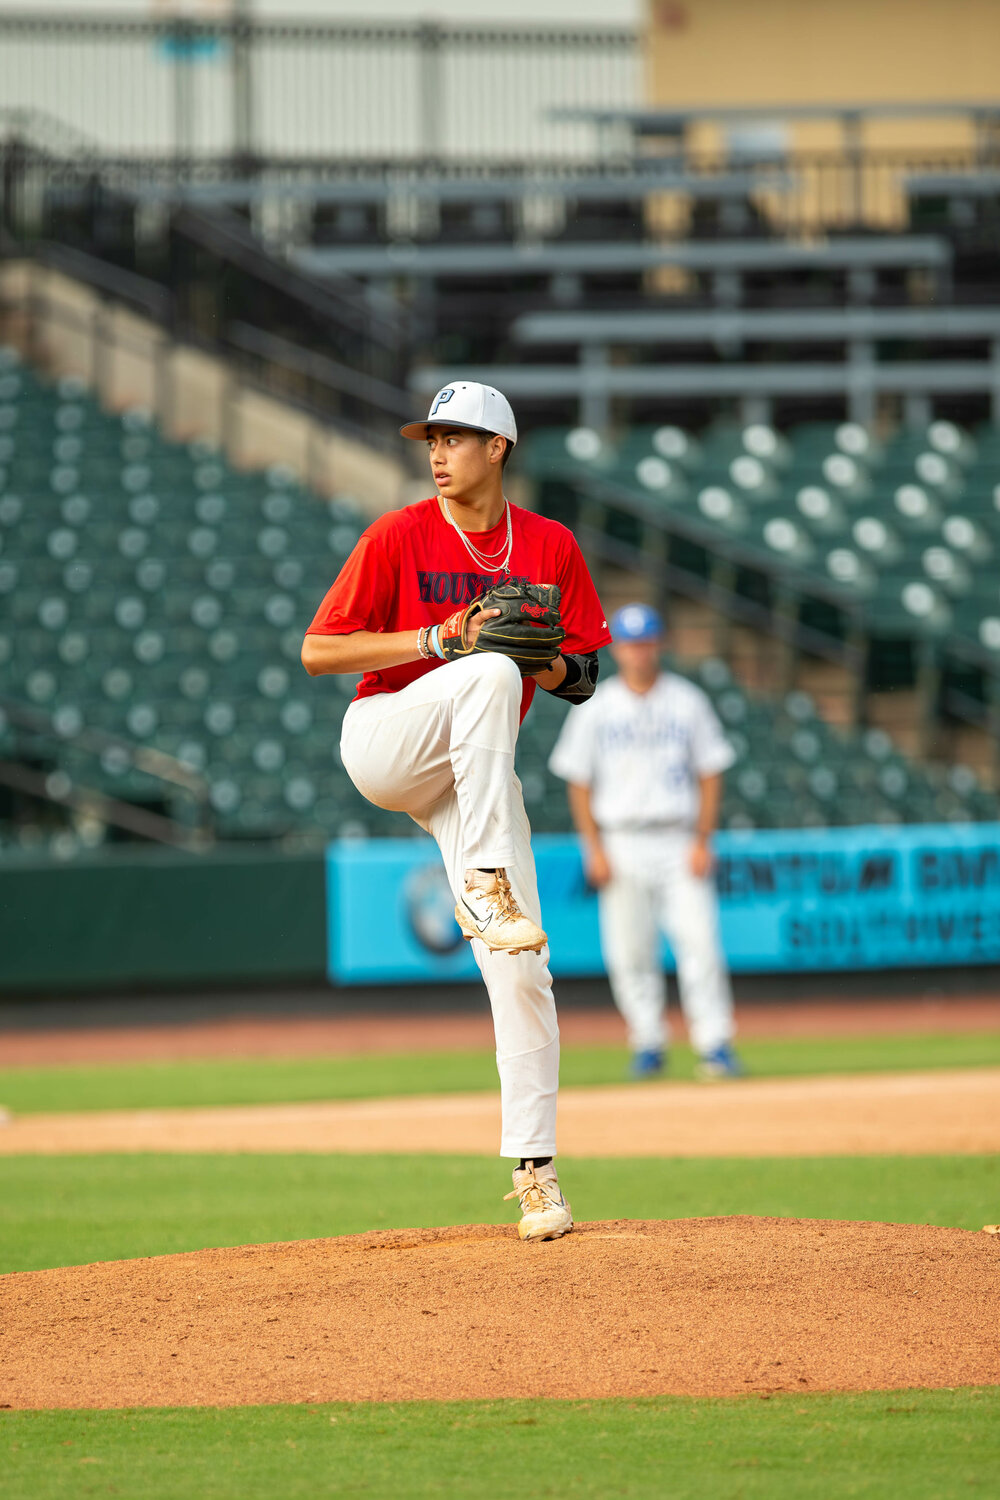 Anthony Diaz pitches during Tuesday's GHBCA Senior All-Star game at Constellation Field in Sugar Land.